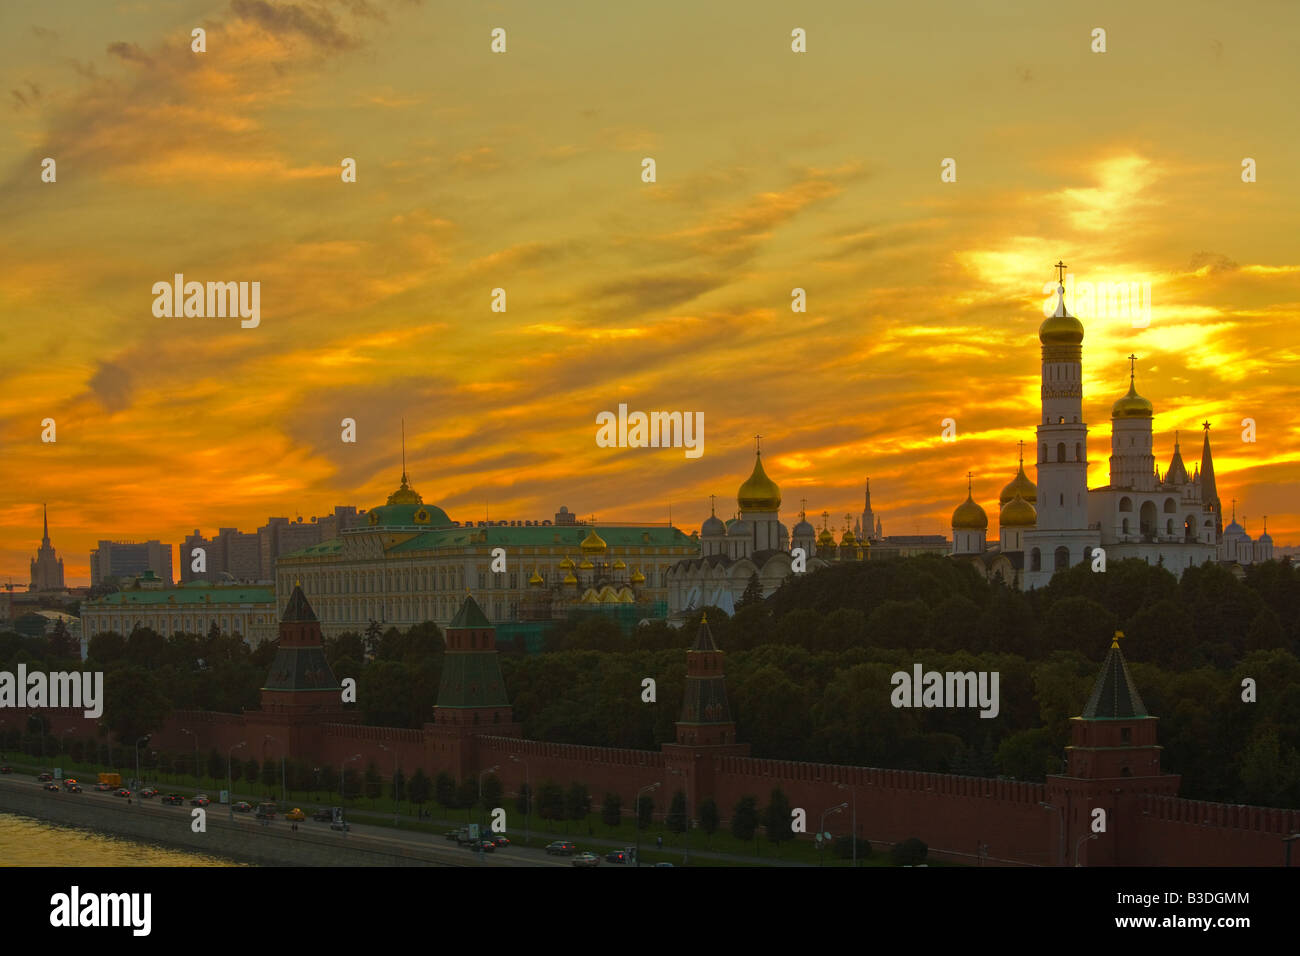 The Kremlin at sunset in Moscow Russia. Stock Photo